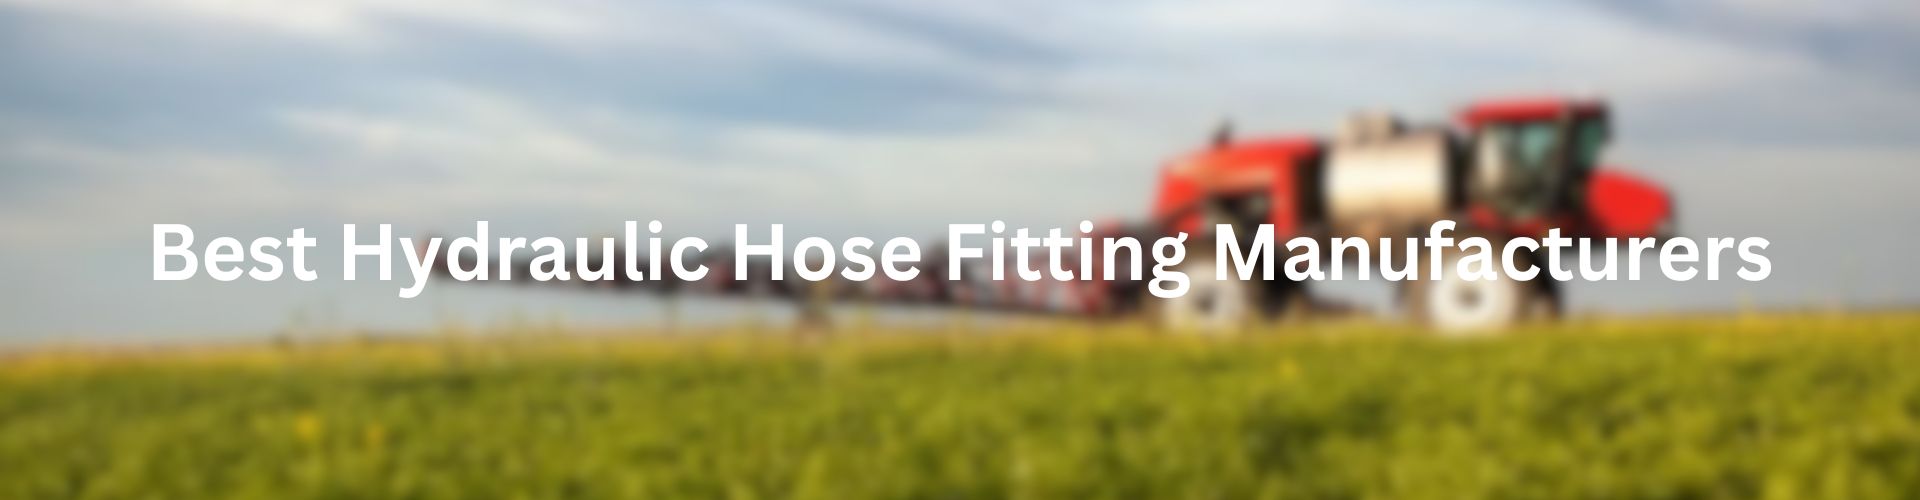 Best Hydraulic Hose fitting Manufacturers Banne